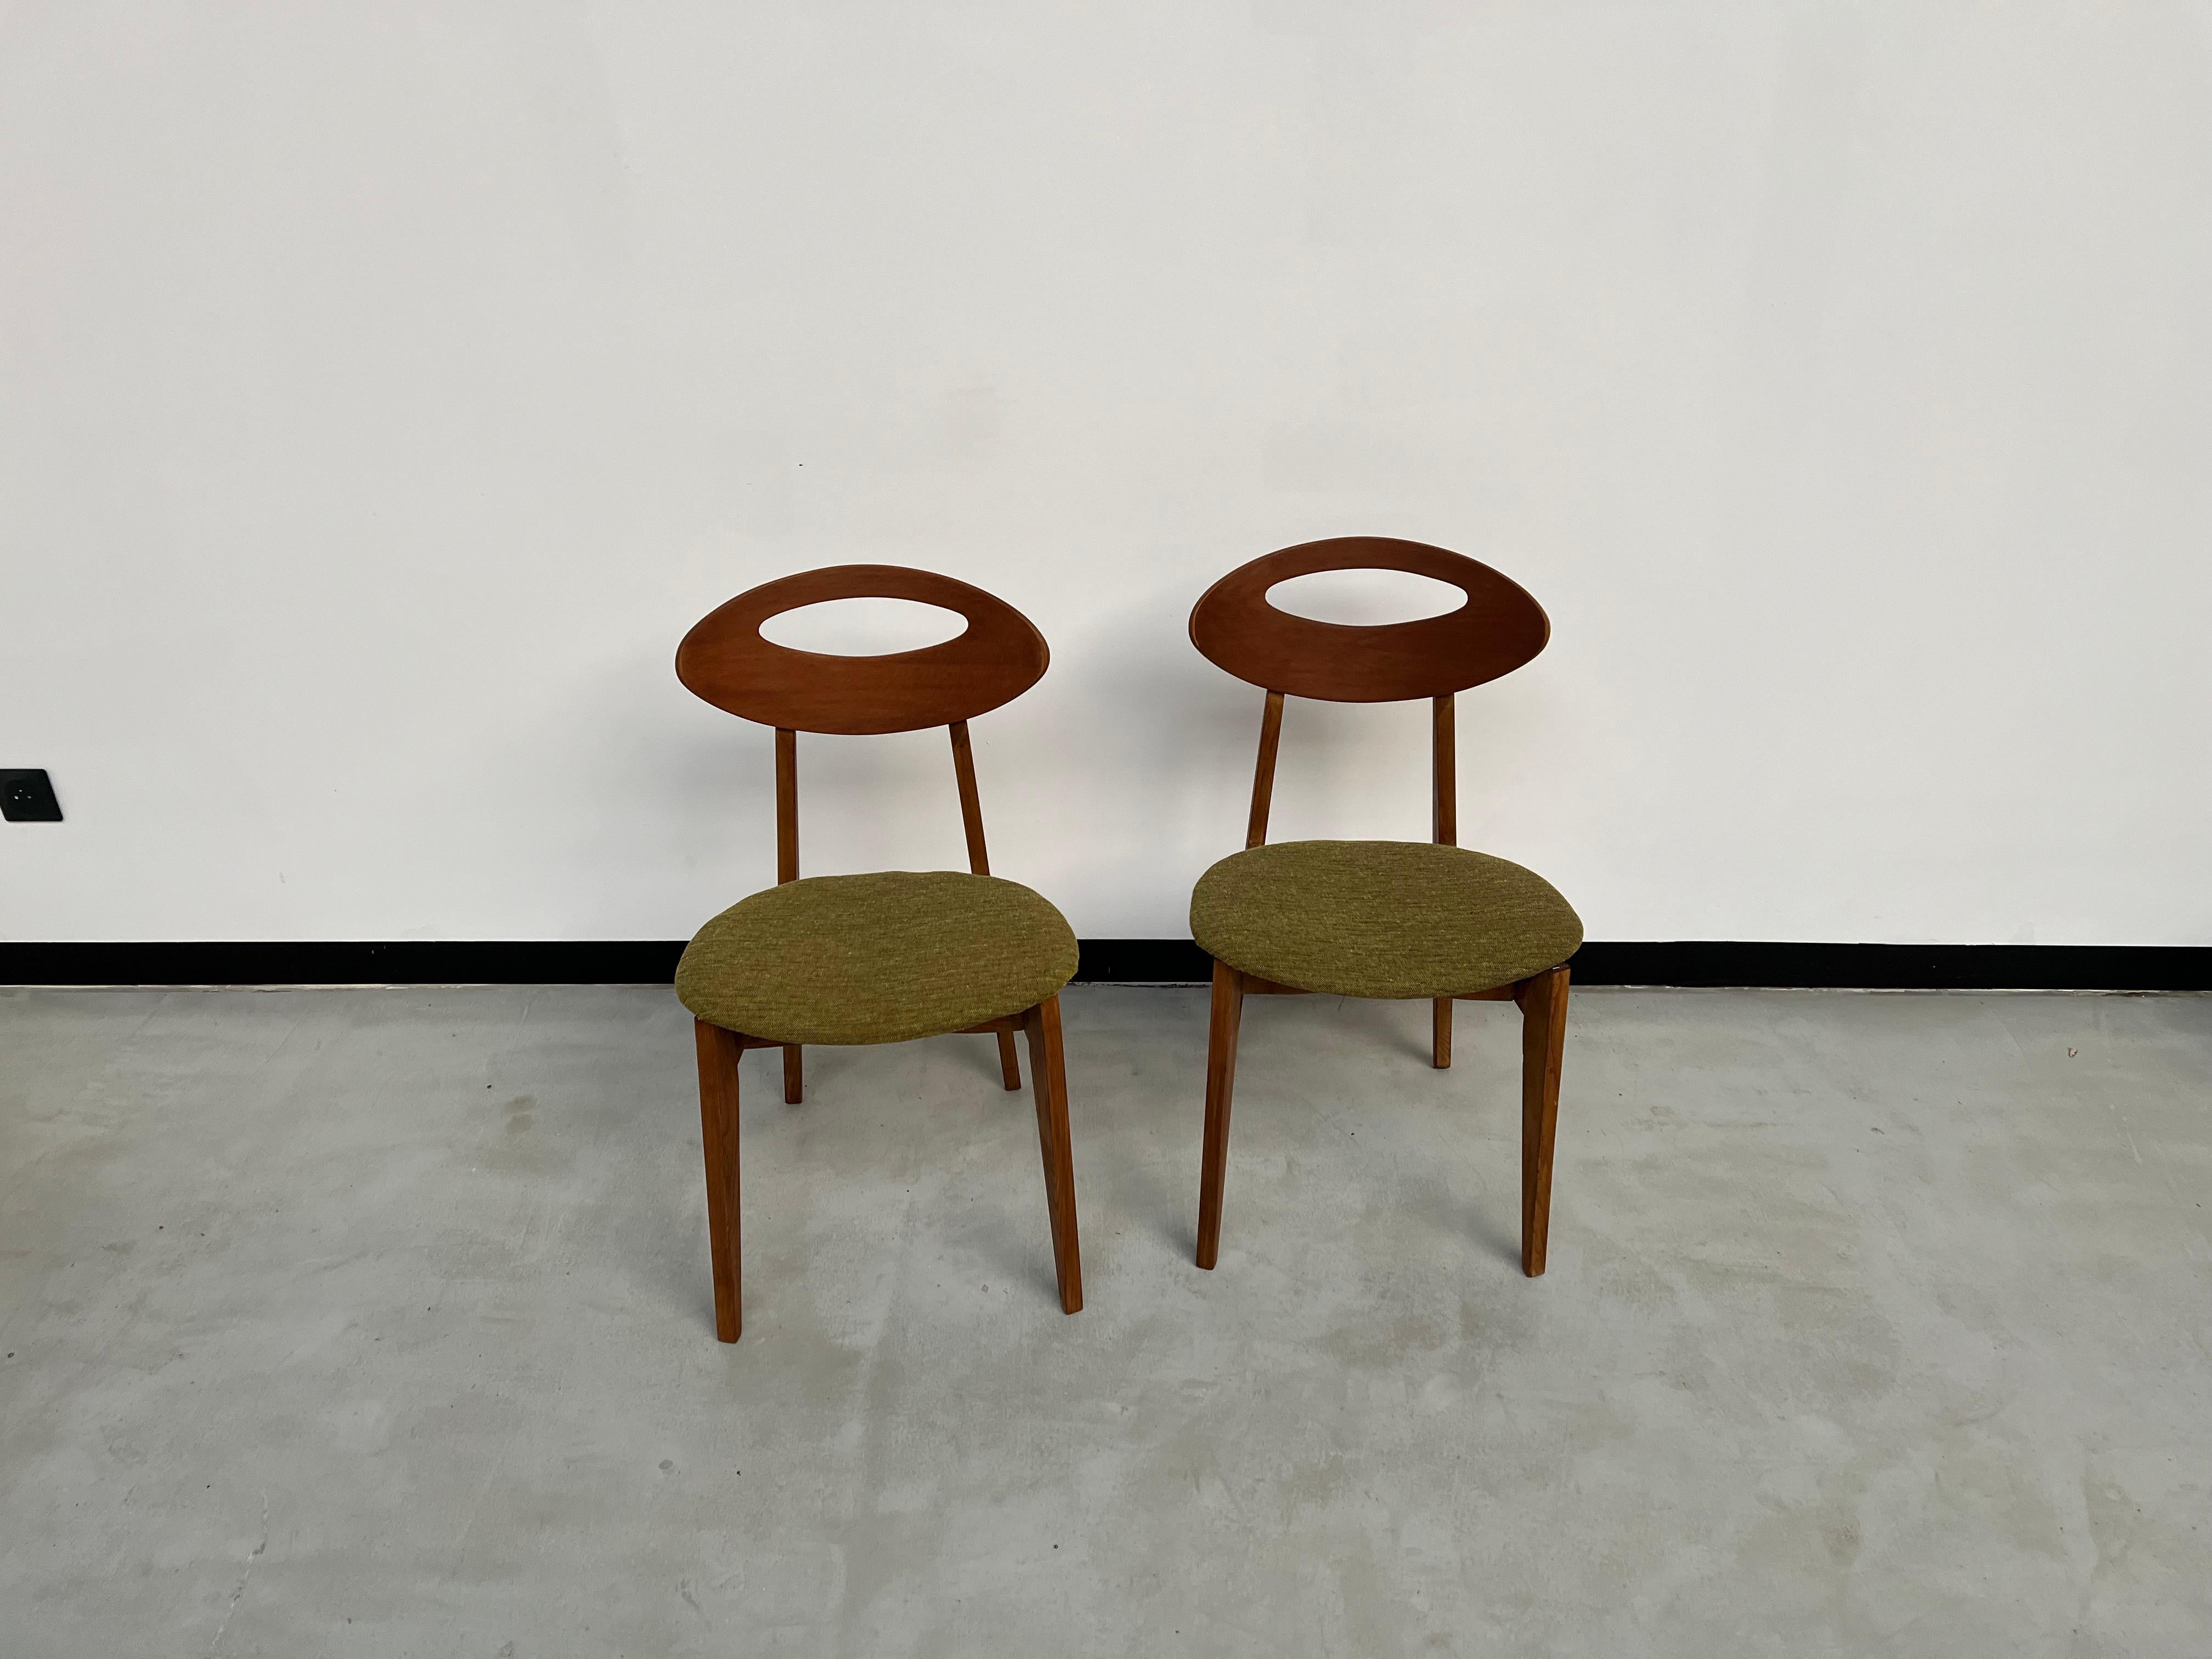  Duo of Roger Landault chairs for Sentou, France 50's 6